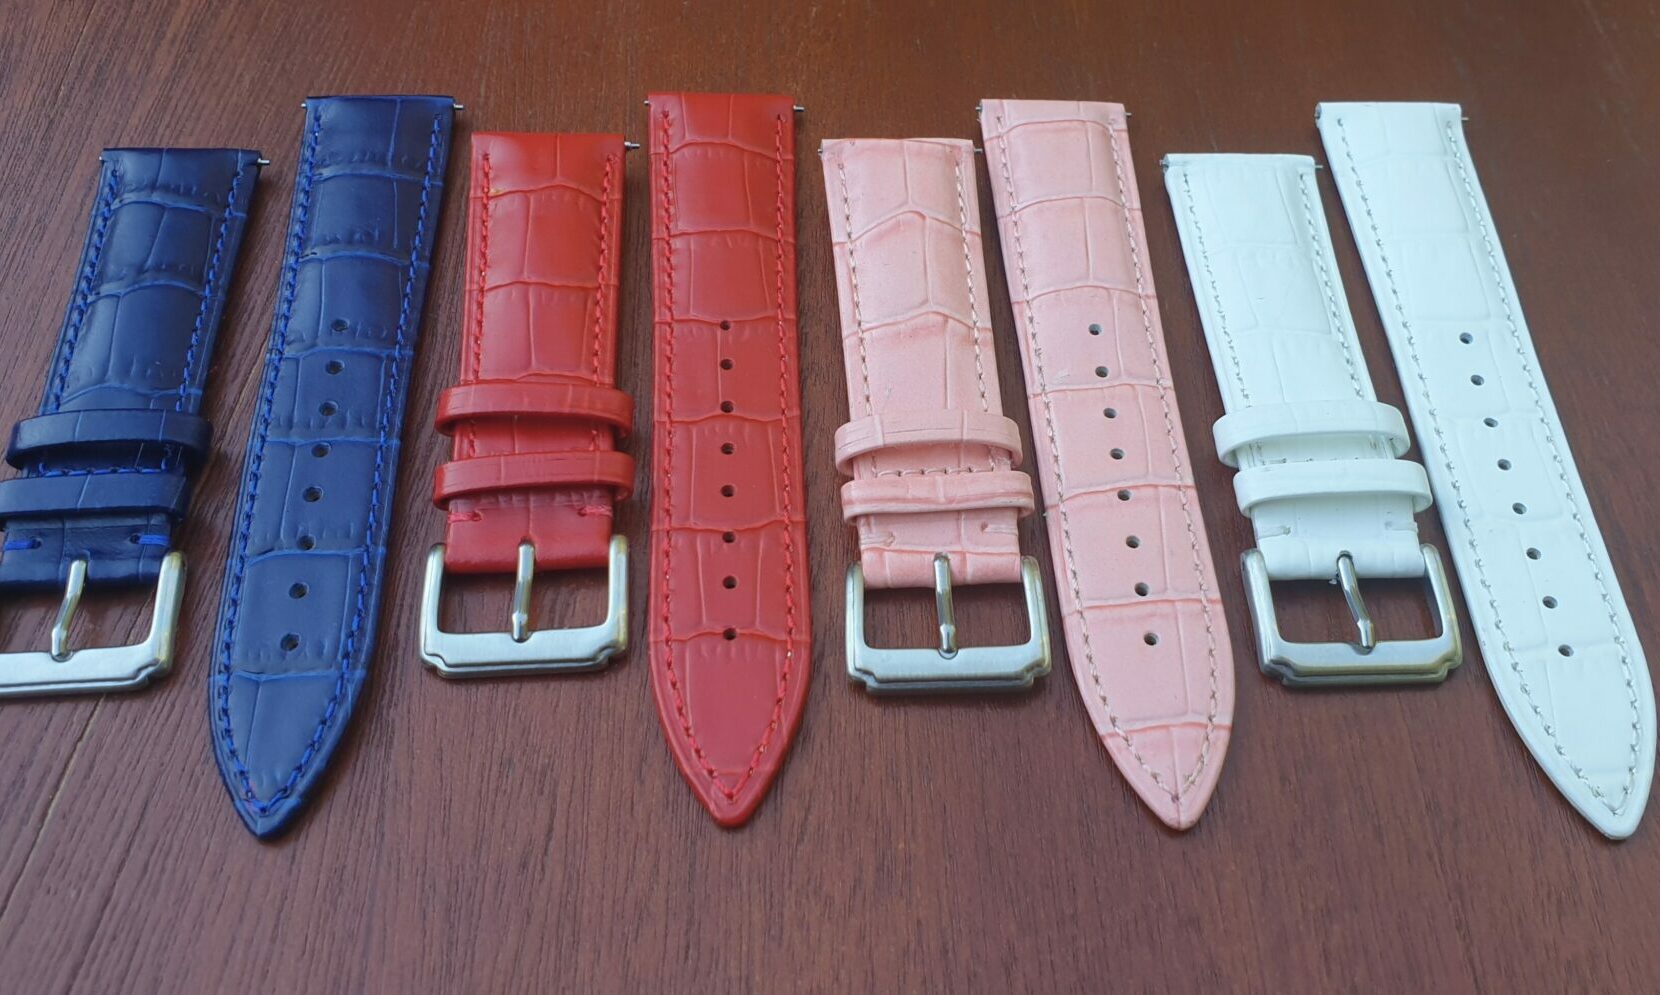 coolum colourful leather watch straps